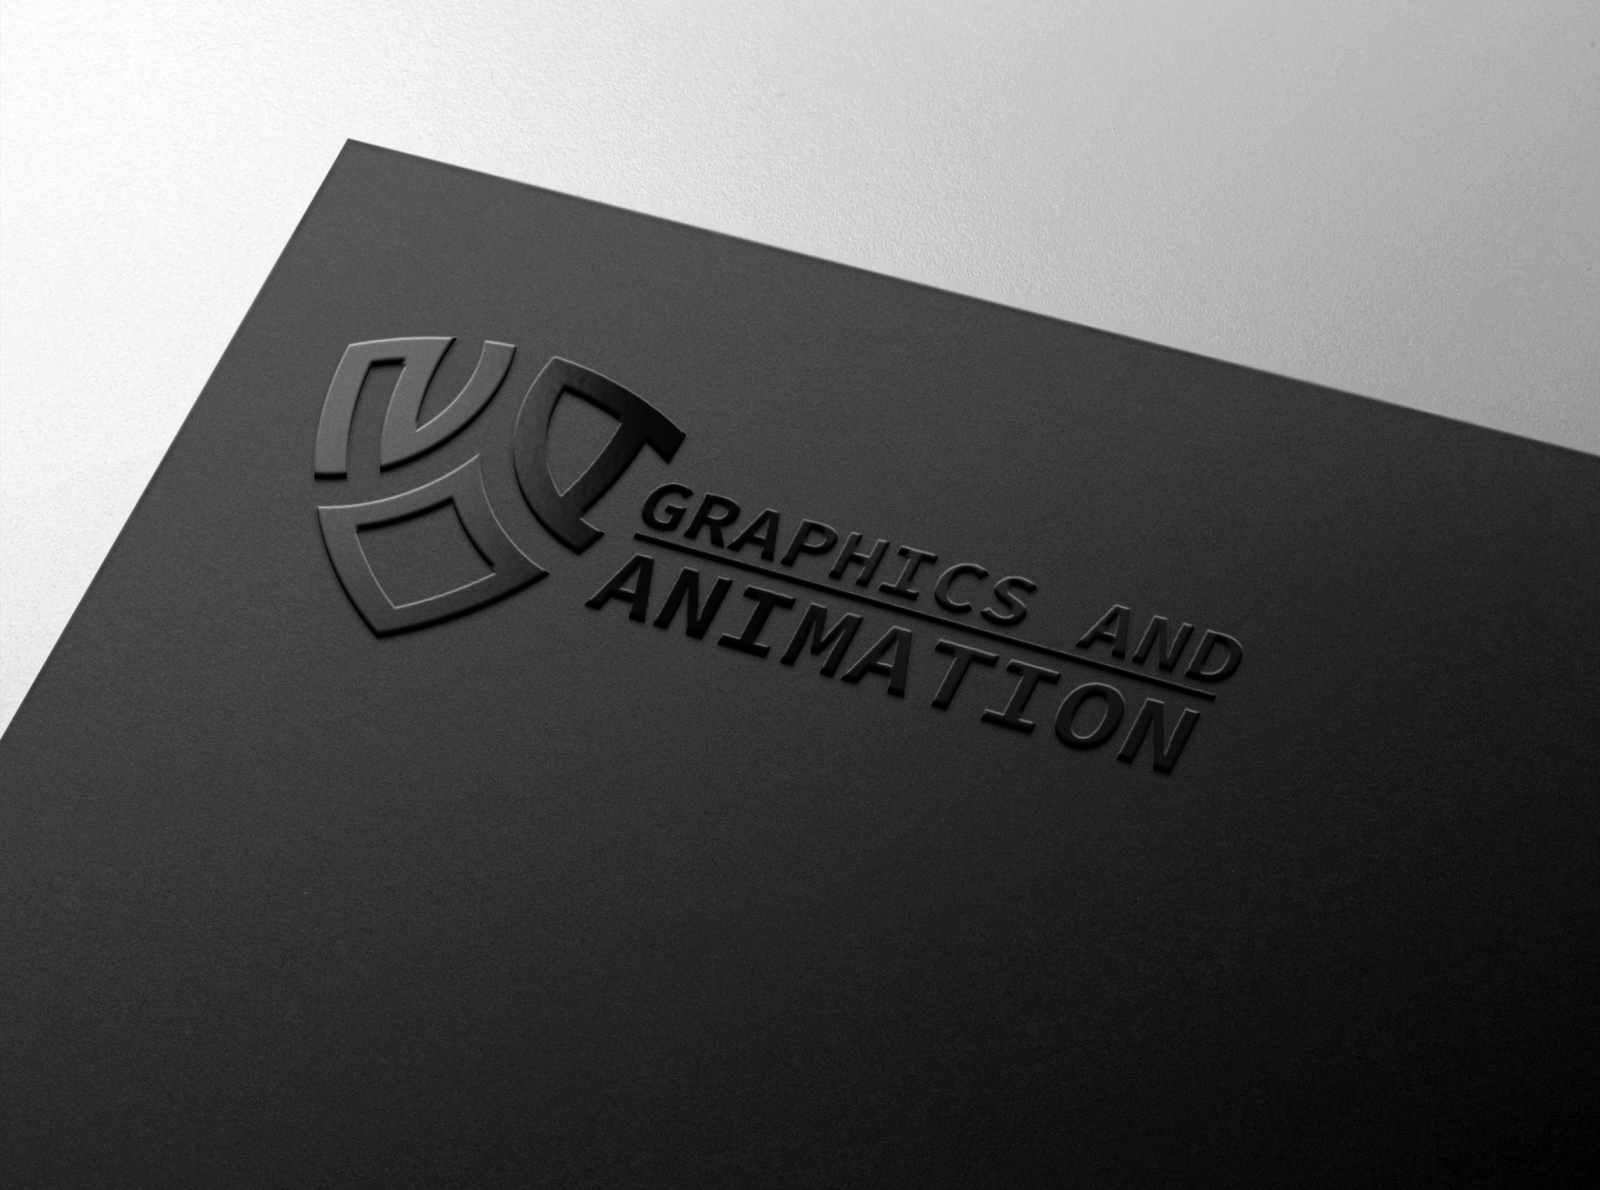 card embossed logo by Nad GRAPHICS AND ANIMATION on Dribbble